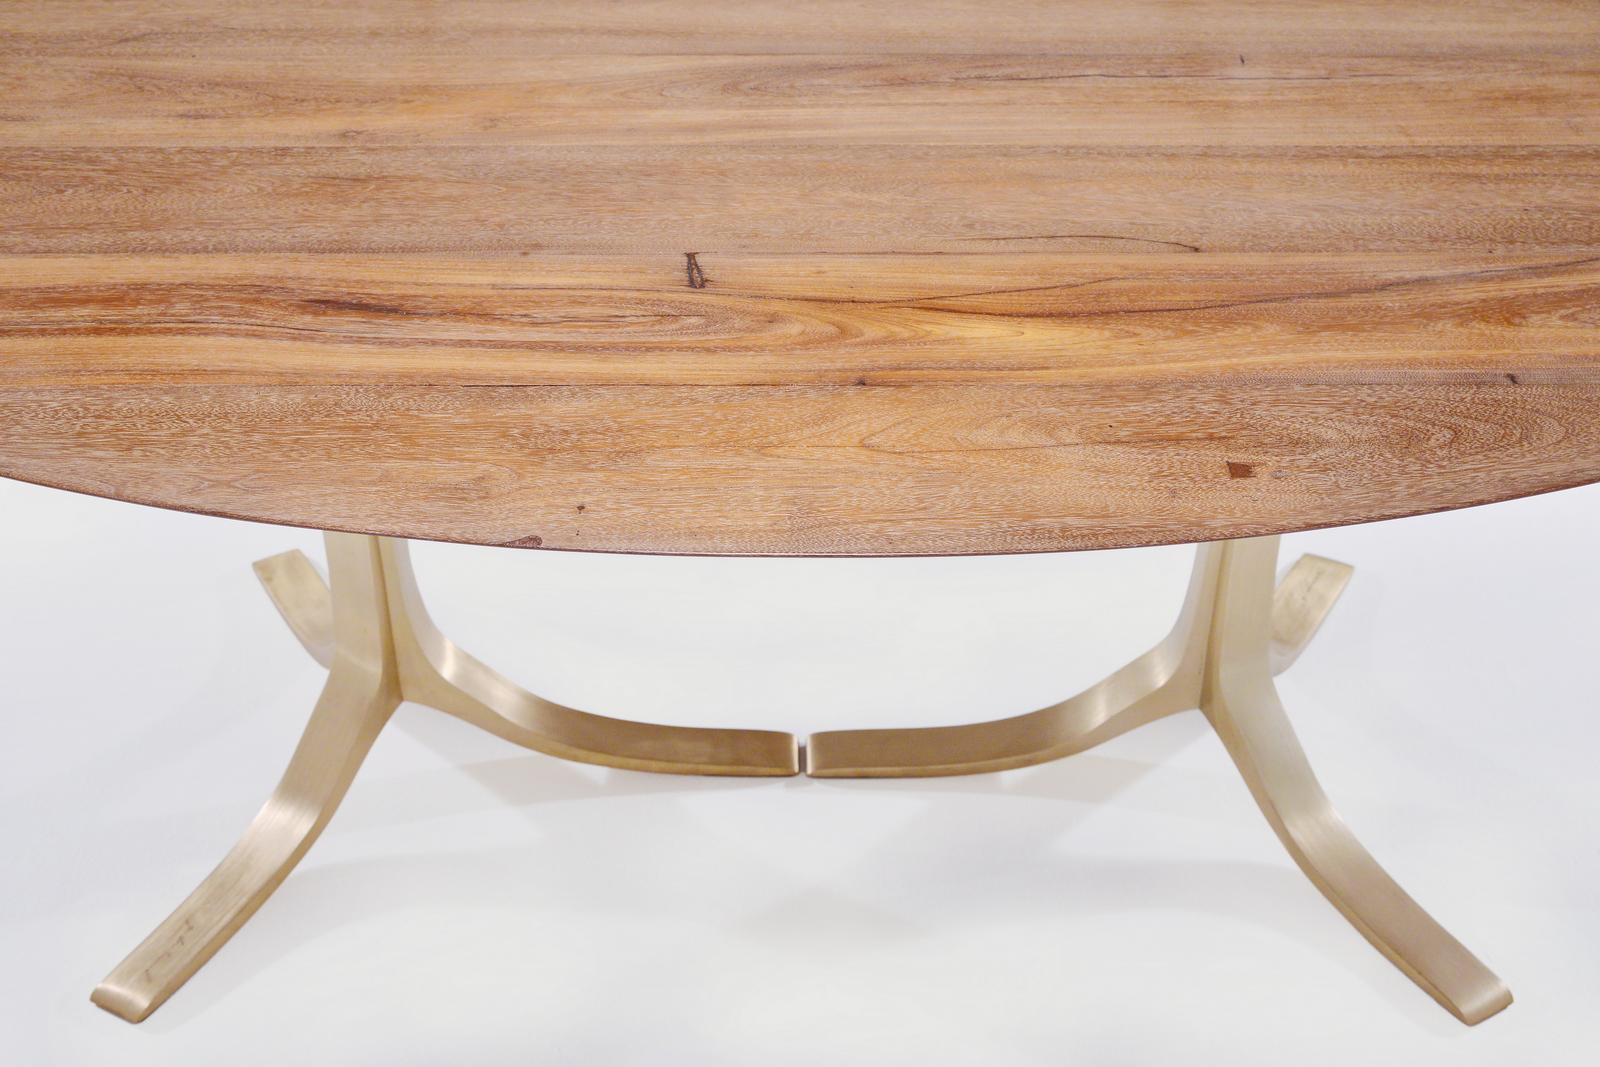 Contemporary Bespoke Oval Table, Reclaimed Hardwood with Brass Base, by P. Tendercool For Sale